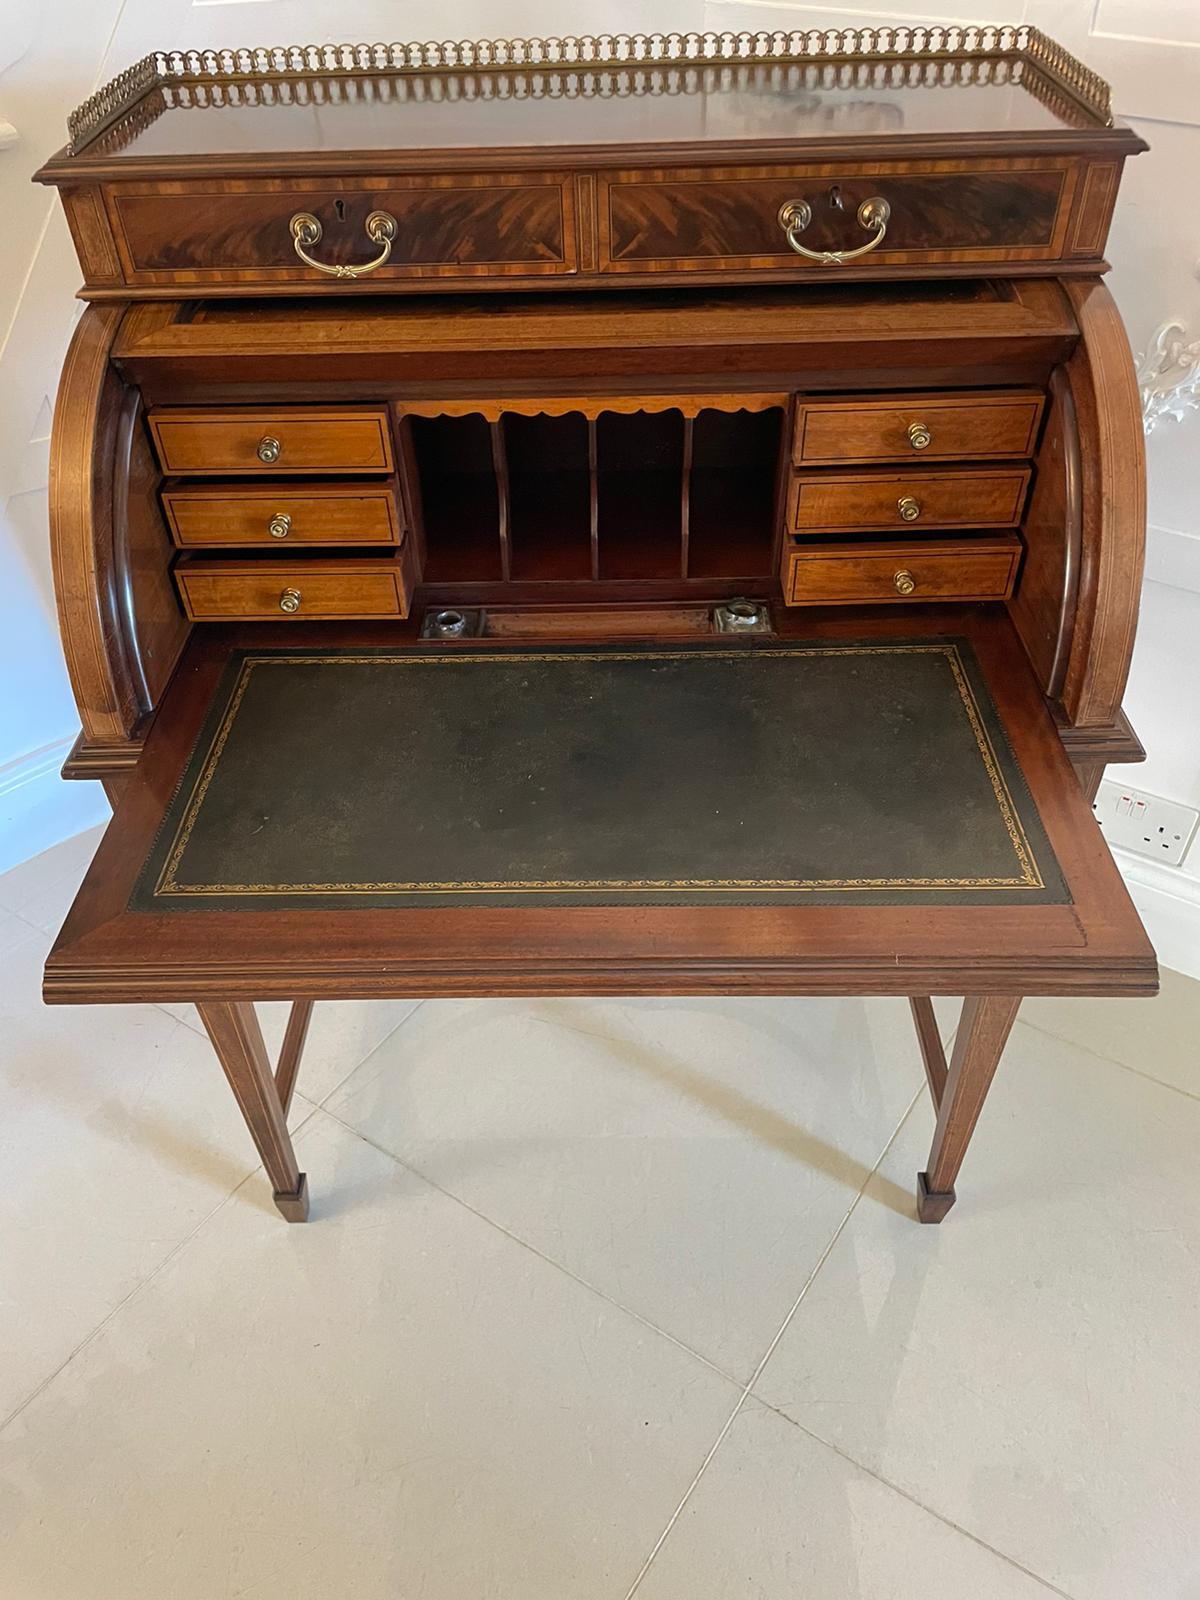 Early 20th Century Fine Quality Antique Edwardian Freestanding Mahogany Inlaid Cylinder Desk For Sale